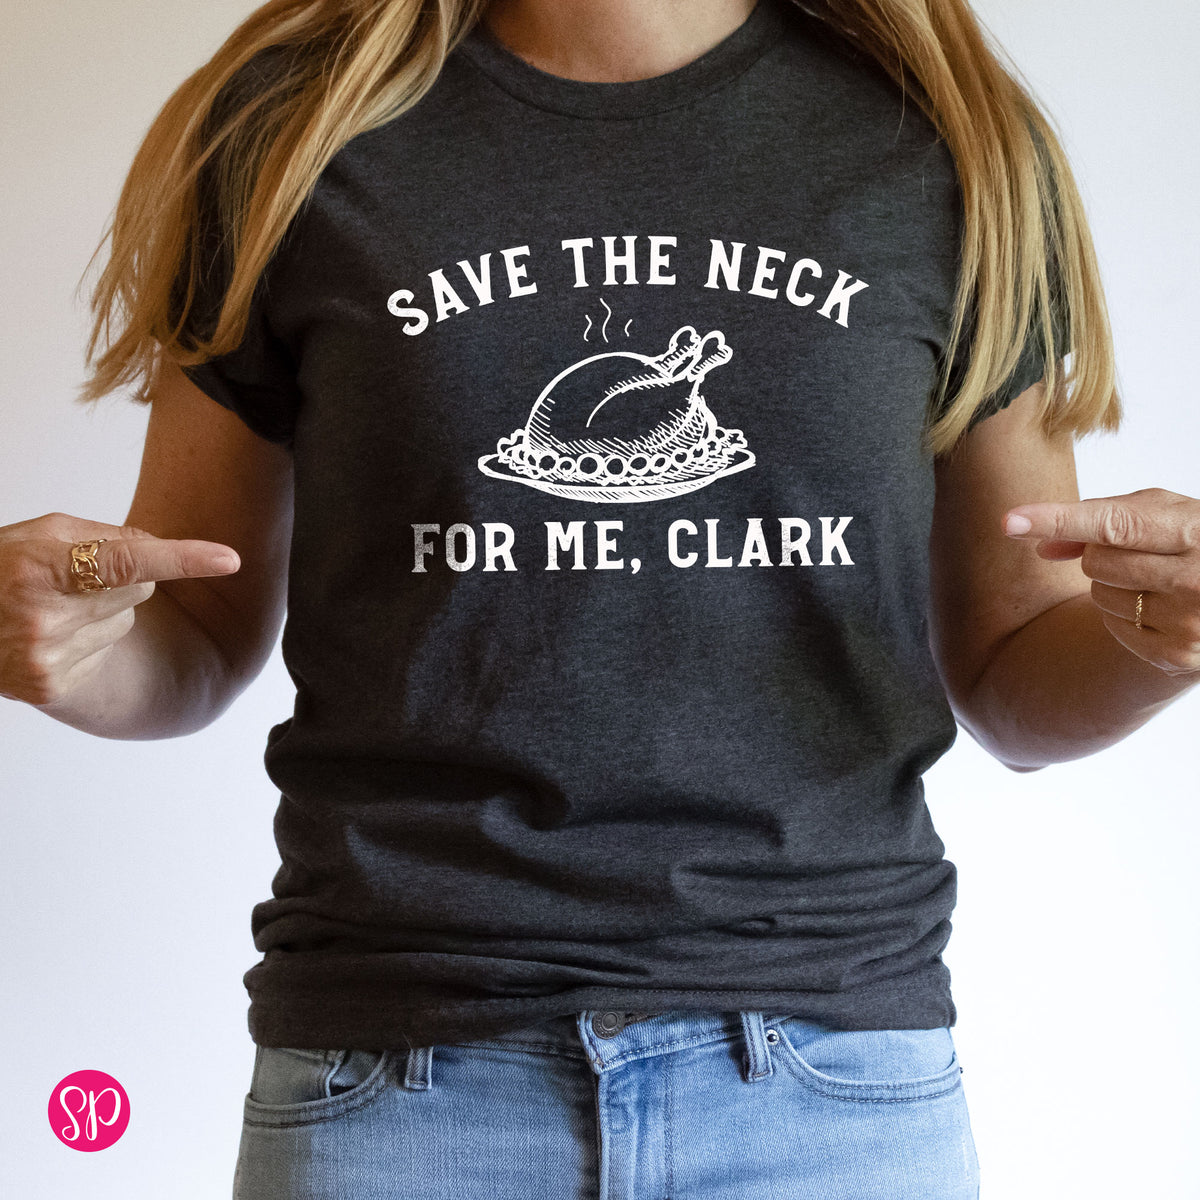 Save the Neck For Me Clark Roasted Turkey Dinner Thanksgiving Christmas Vacation Graphic Tee Shirt Movie Pun Funny